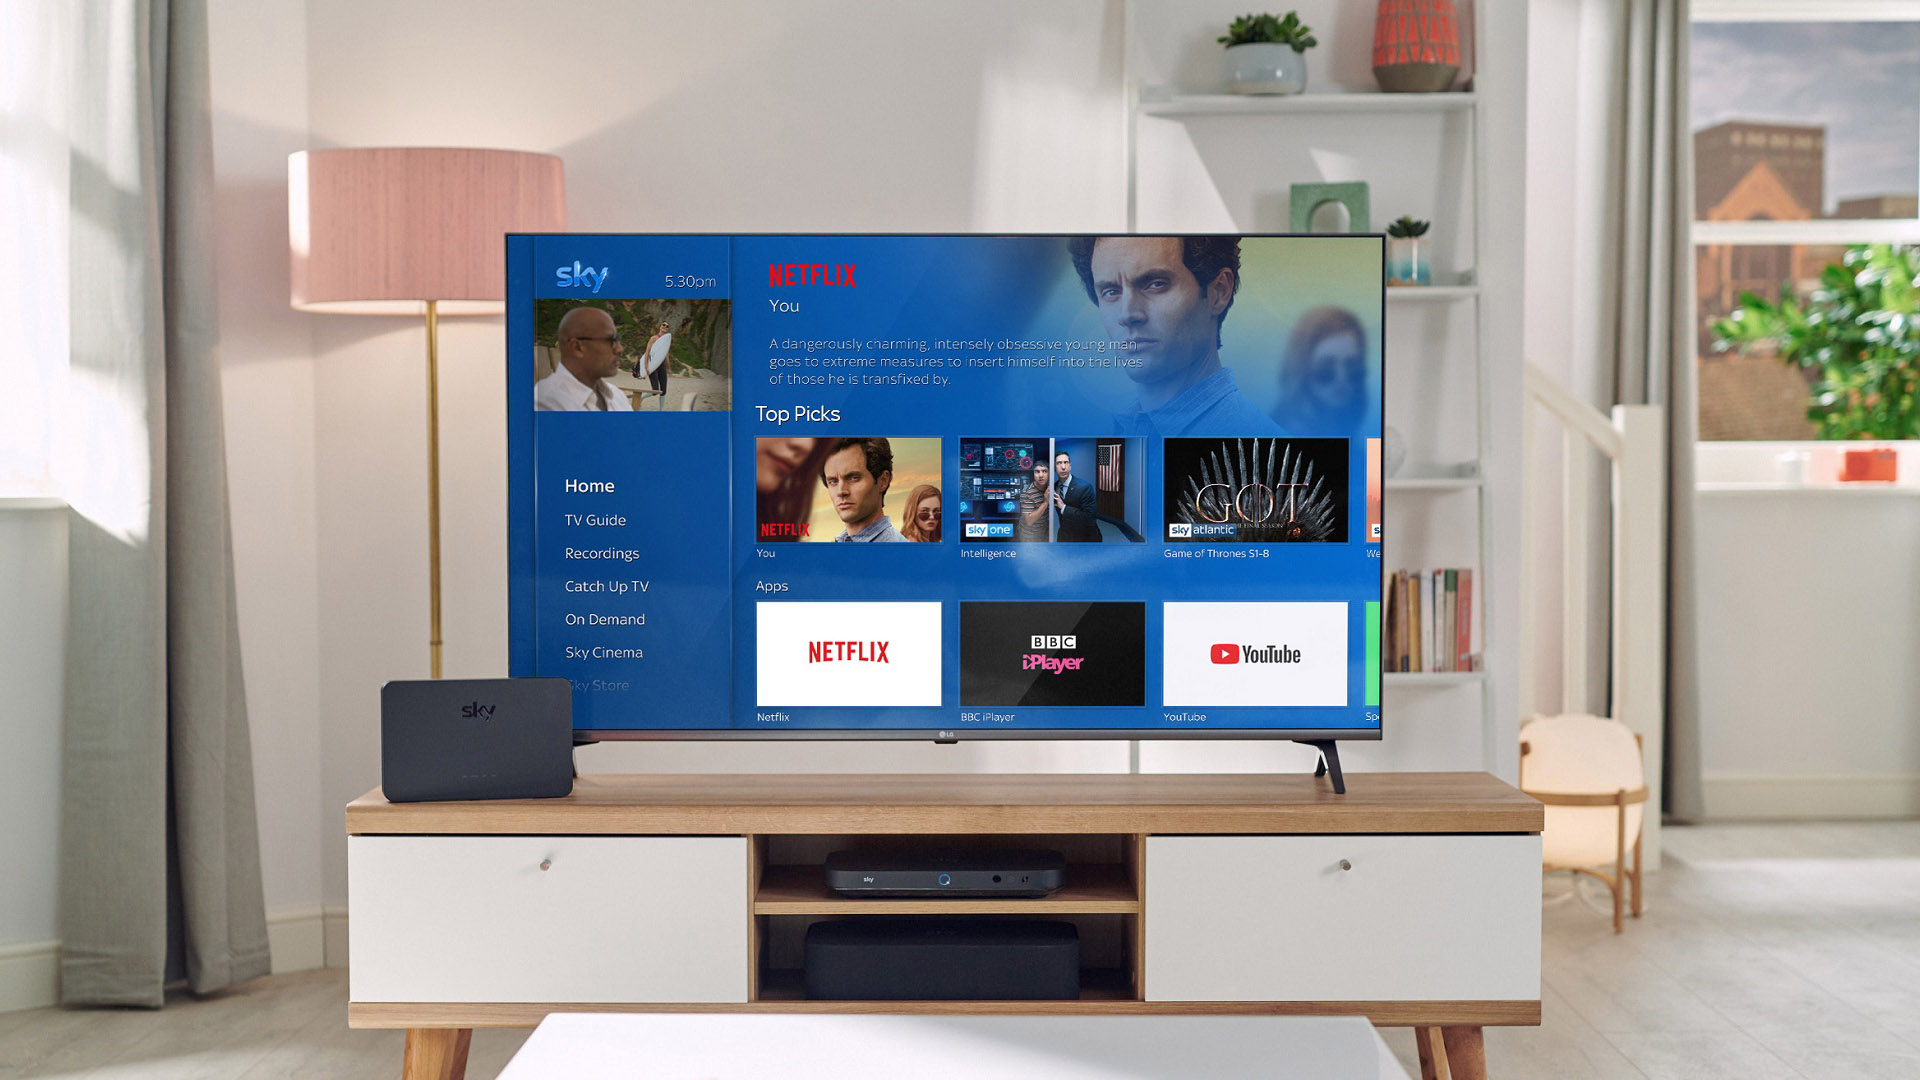 Sky Ultimate on Demand get Netflix and Sky in one package TechRadar